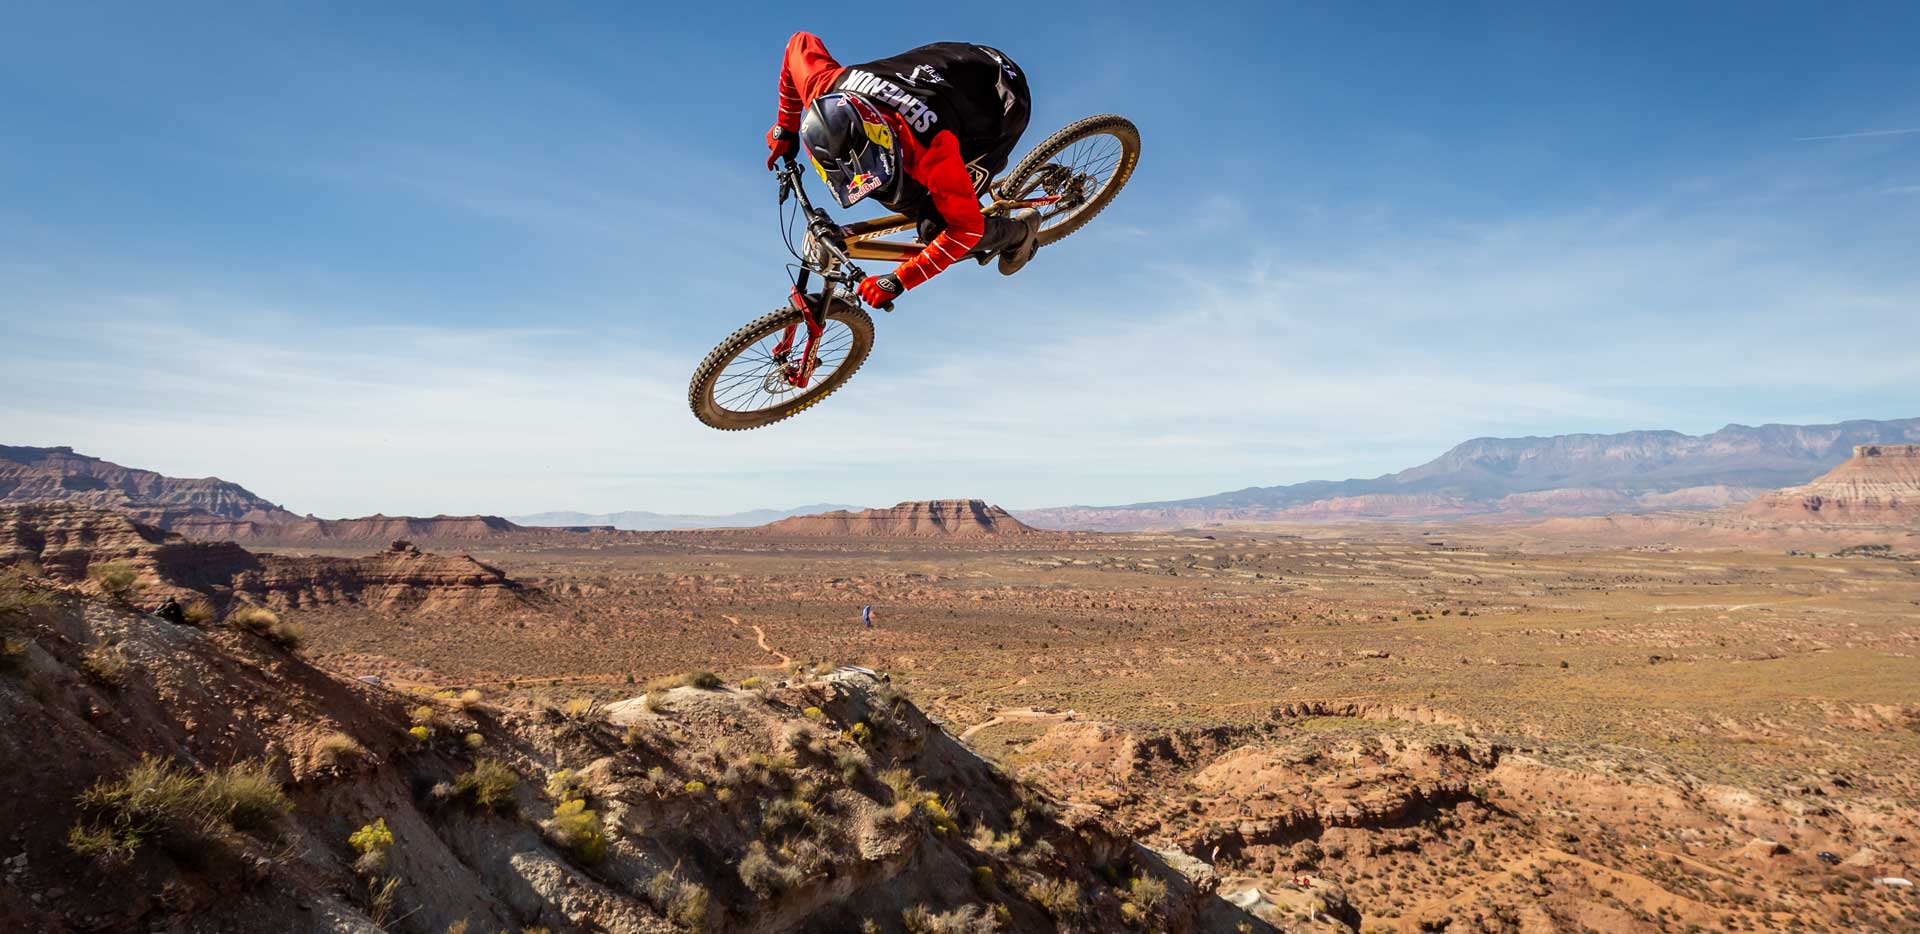 red bull rampage shop